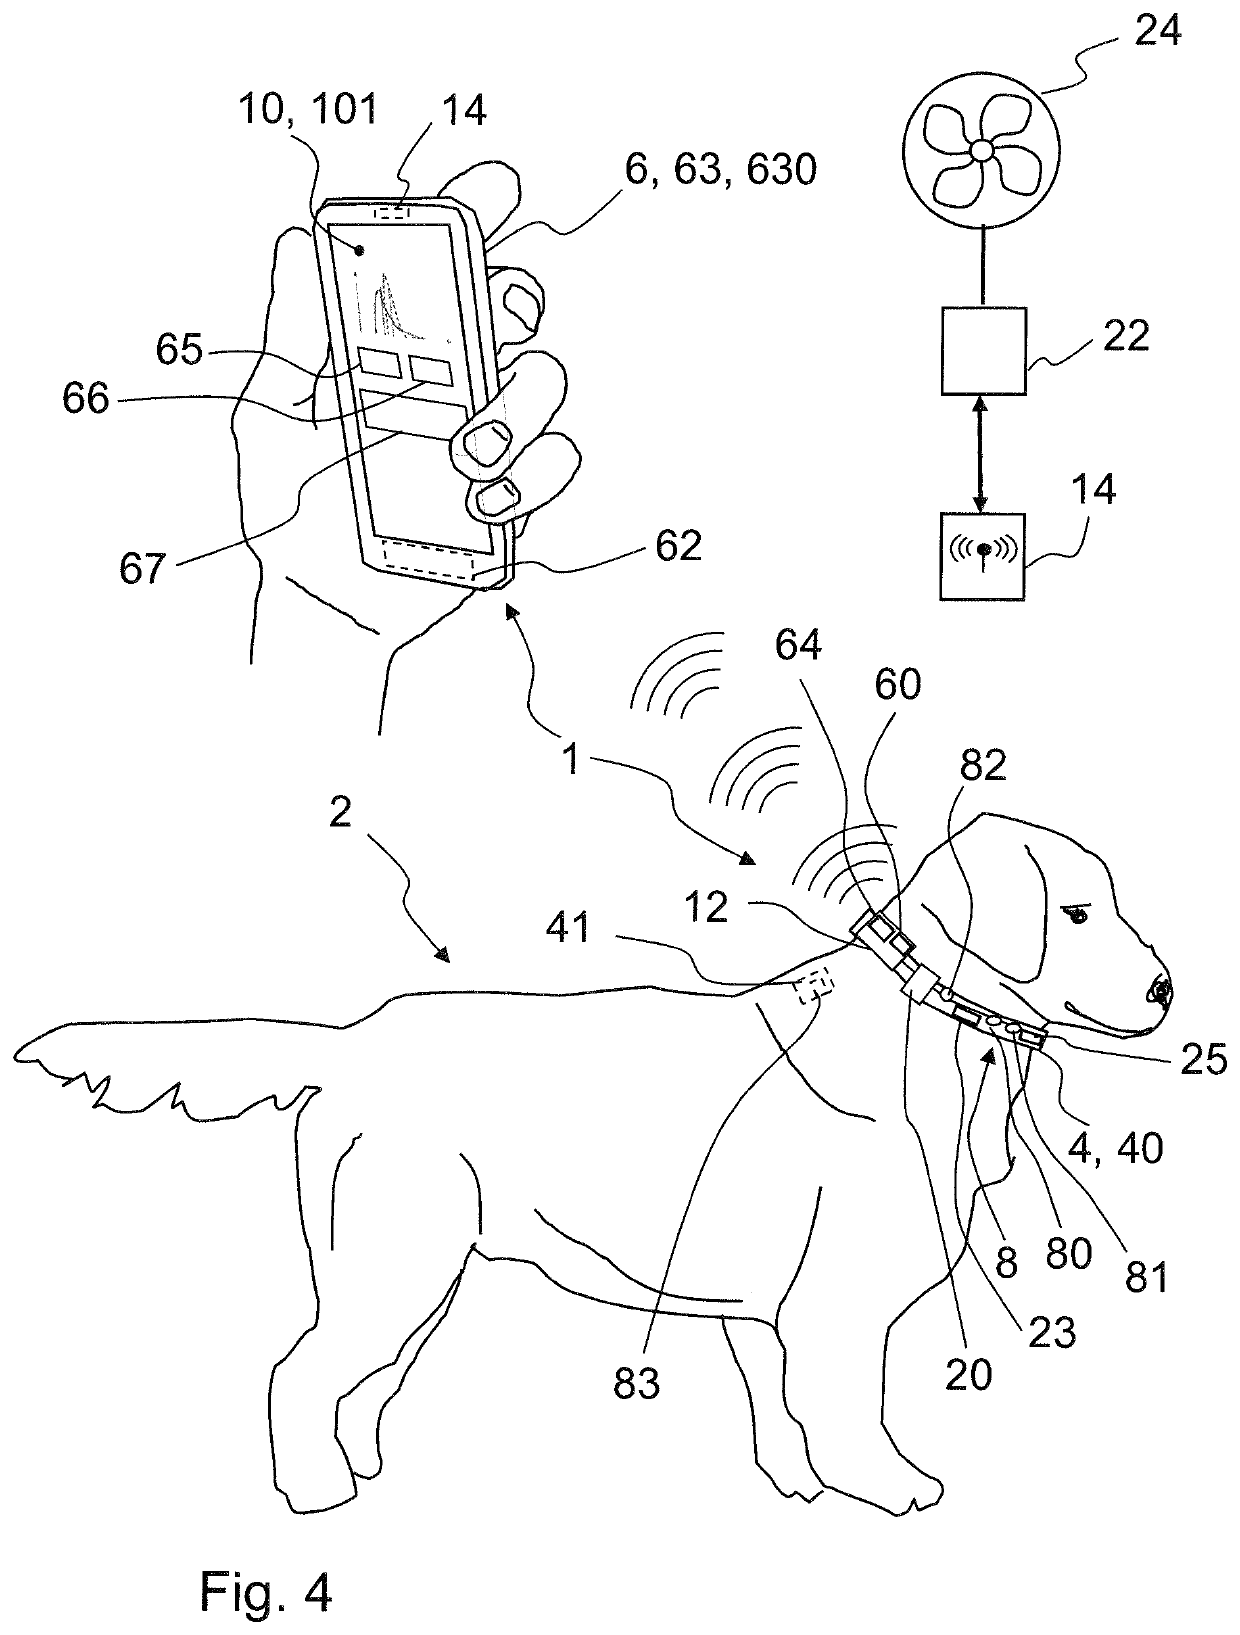 Monitoring device for animals